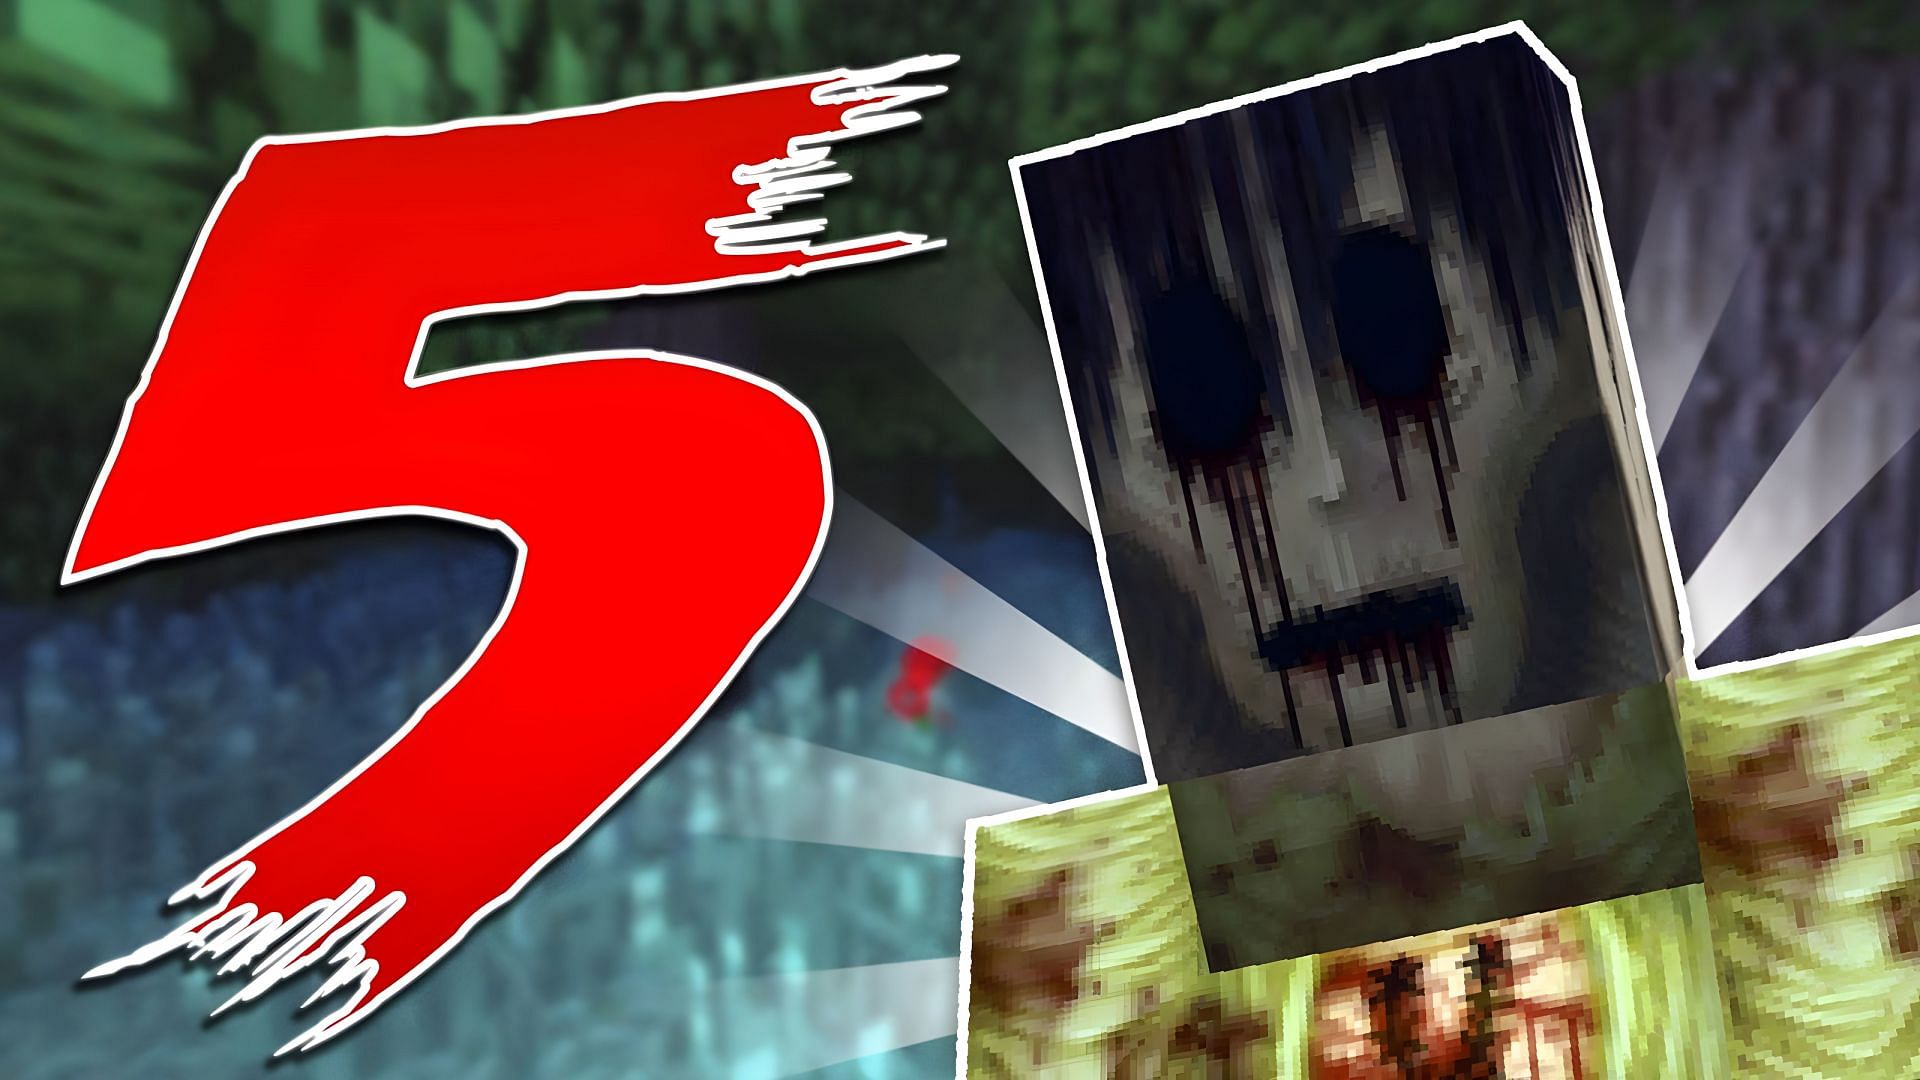 Scary texture packs can be quite frightening (Image via Youtube/BeckBroJack)